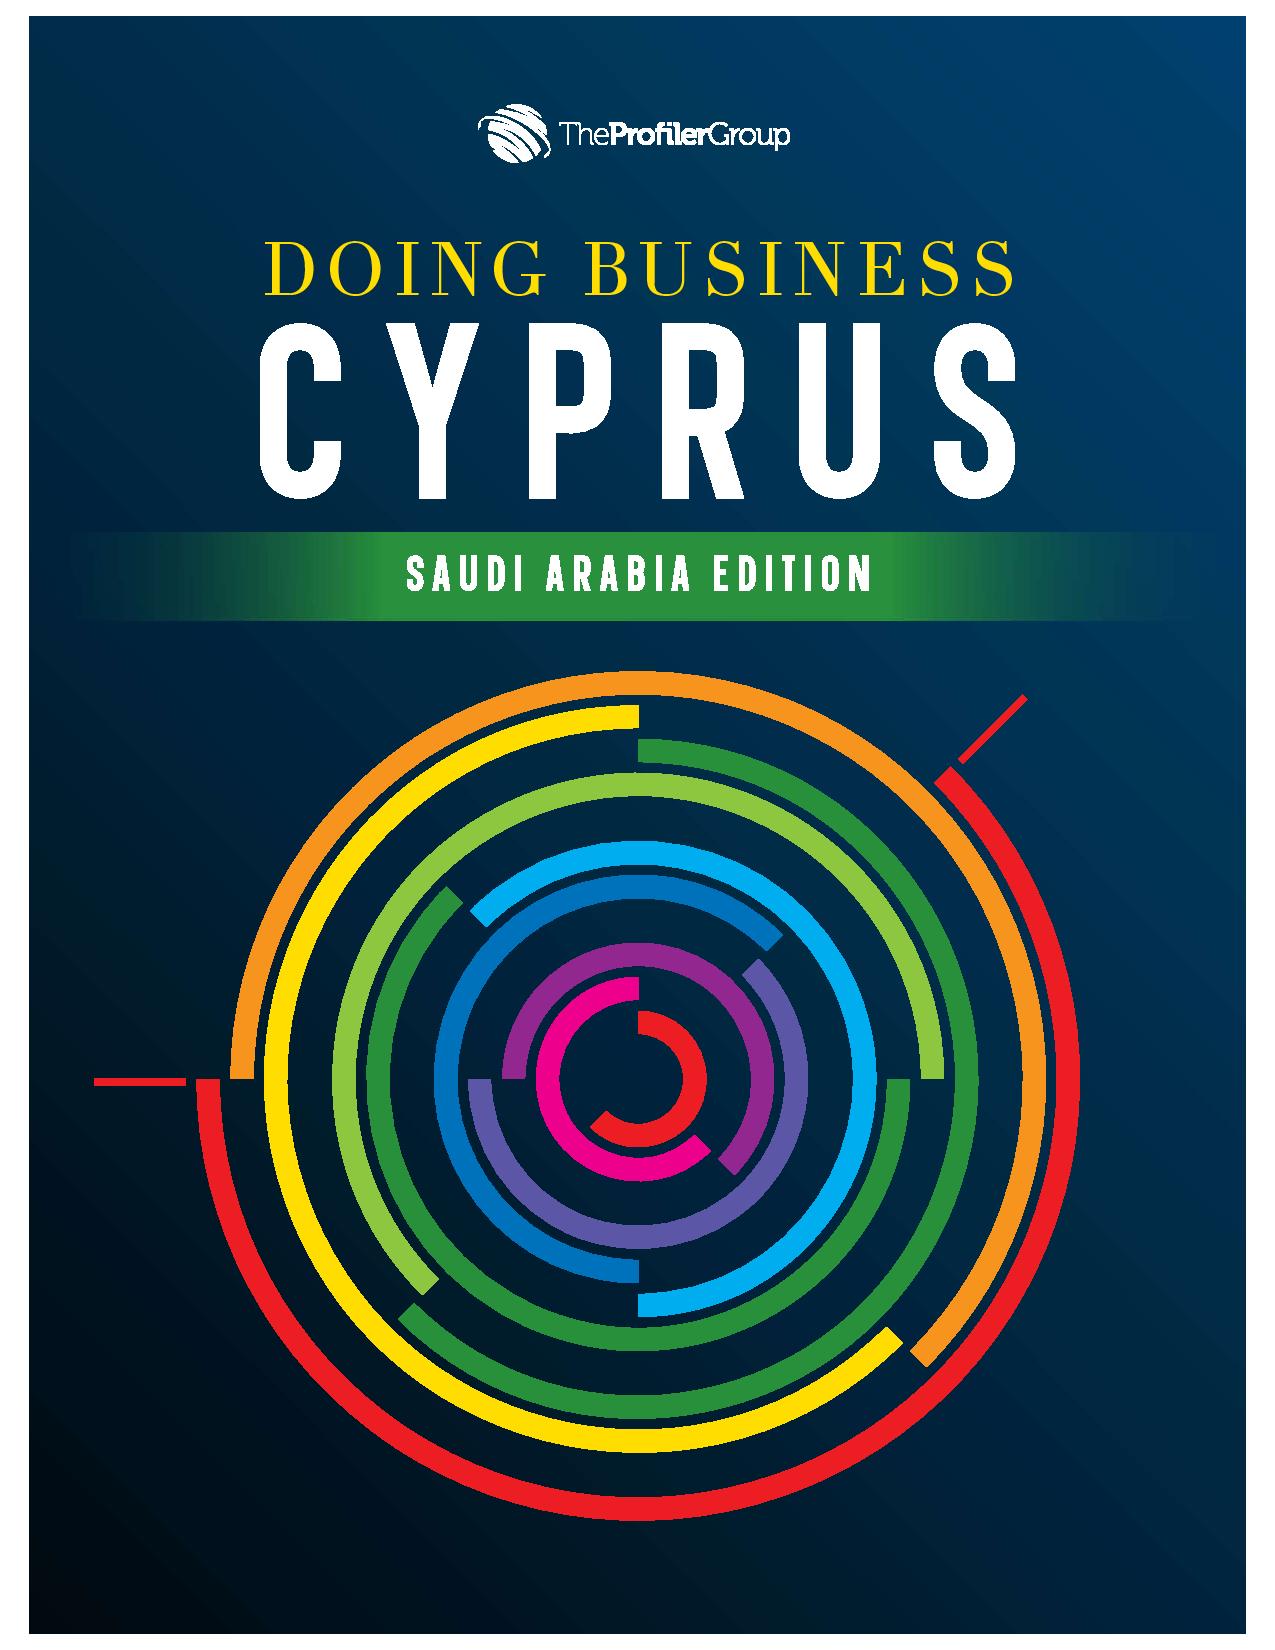 Doing Business in Cyprus (Saudi Edition)